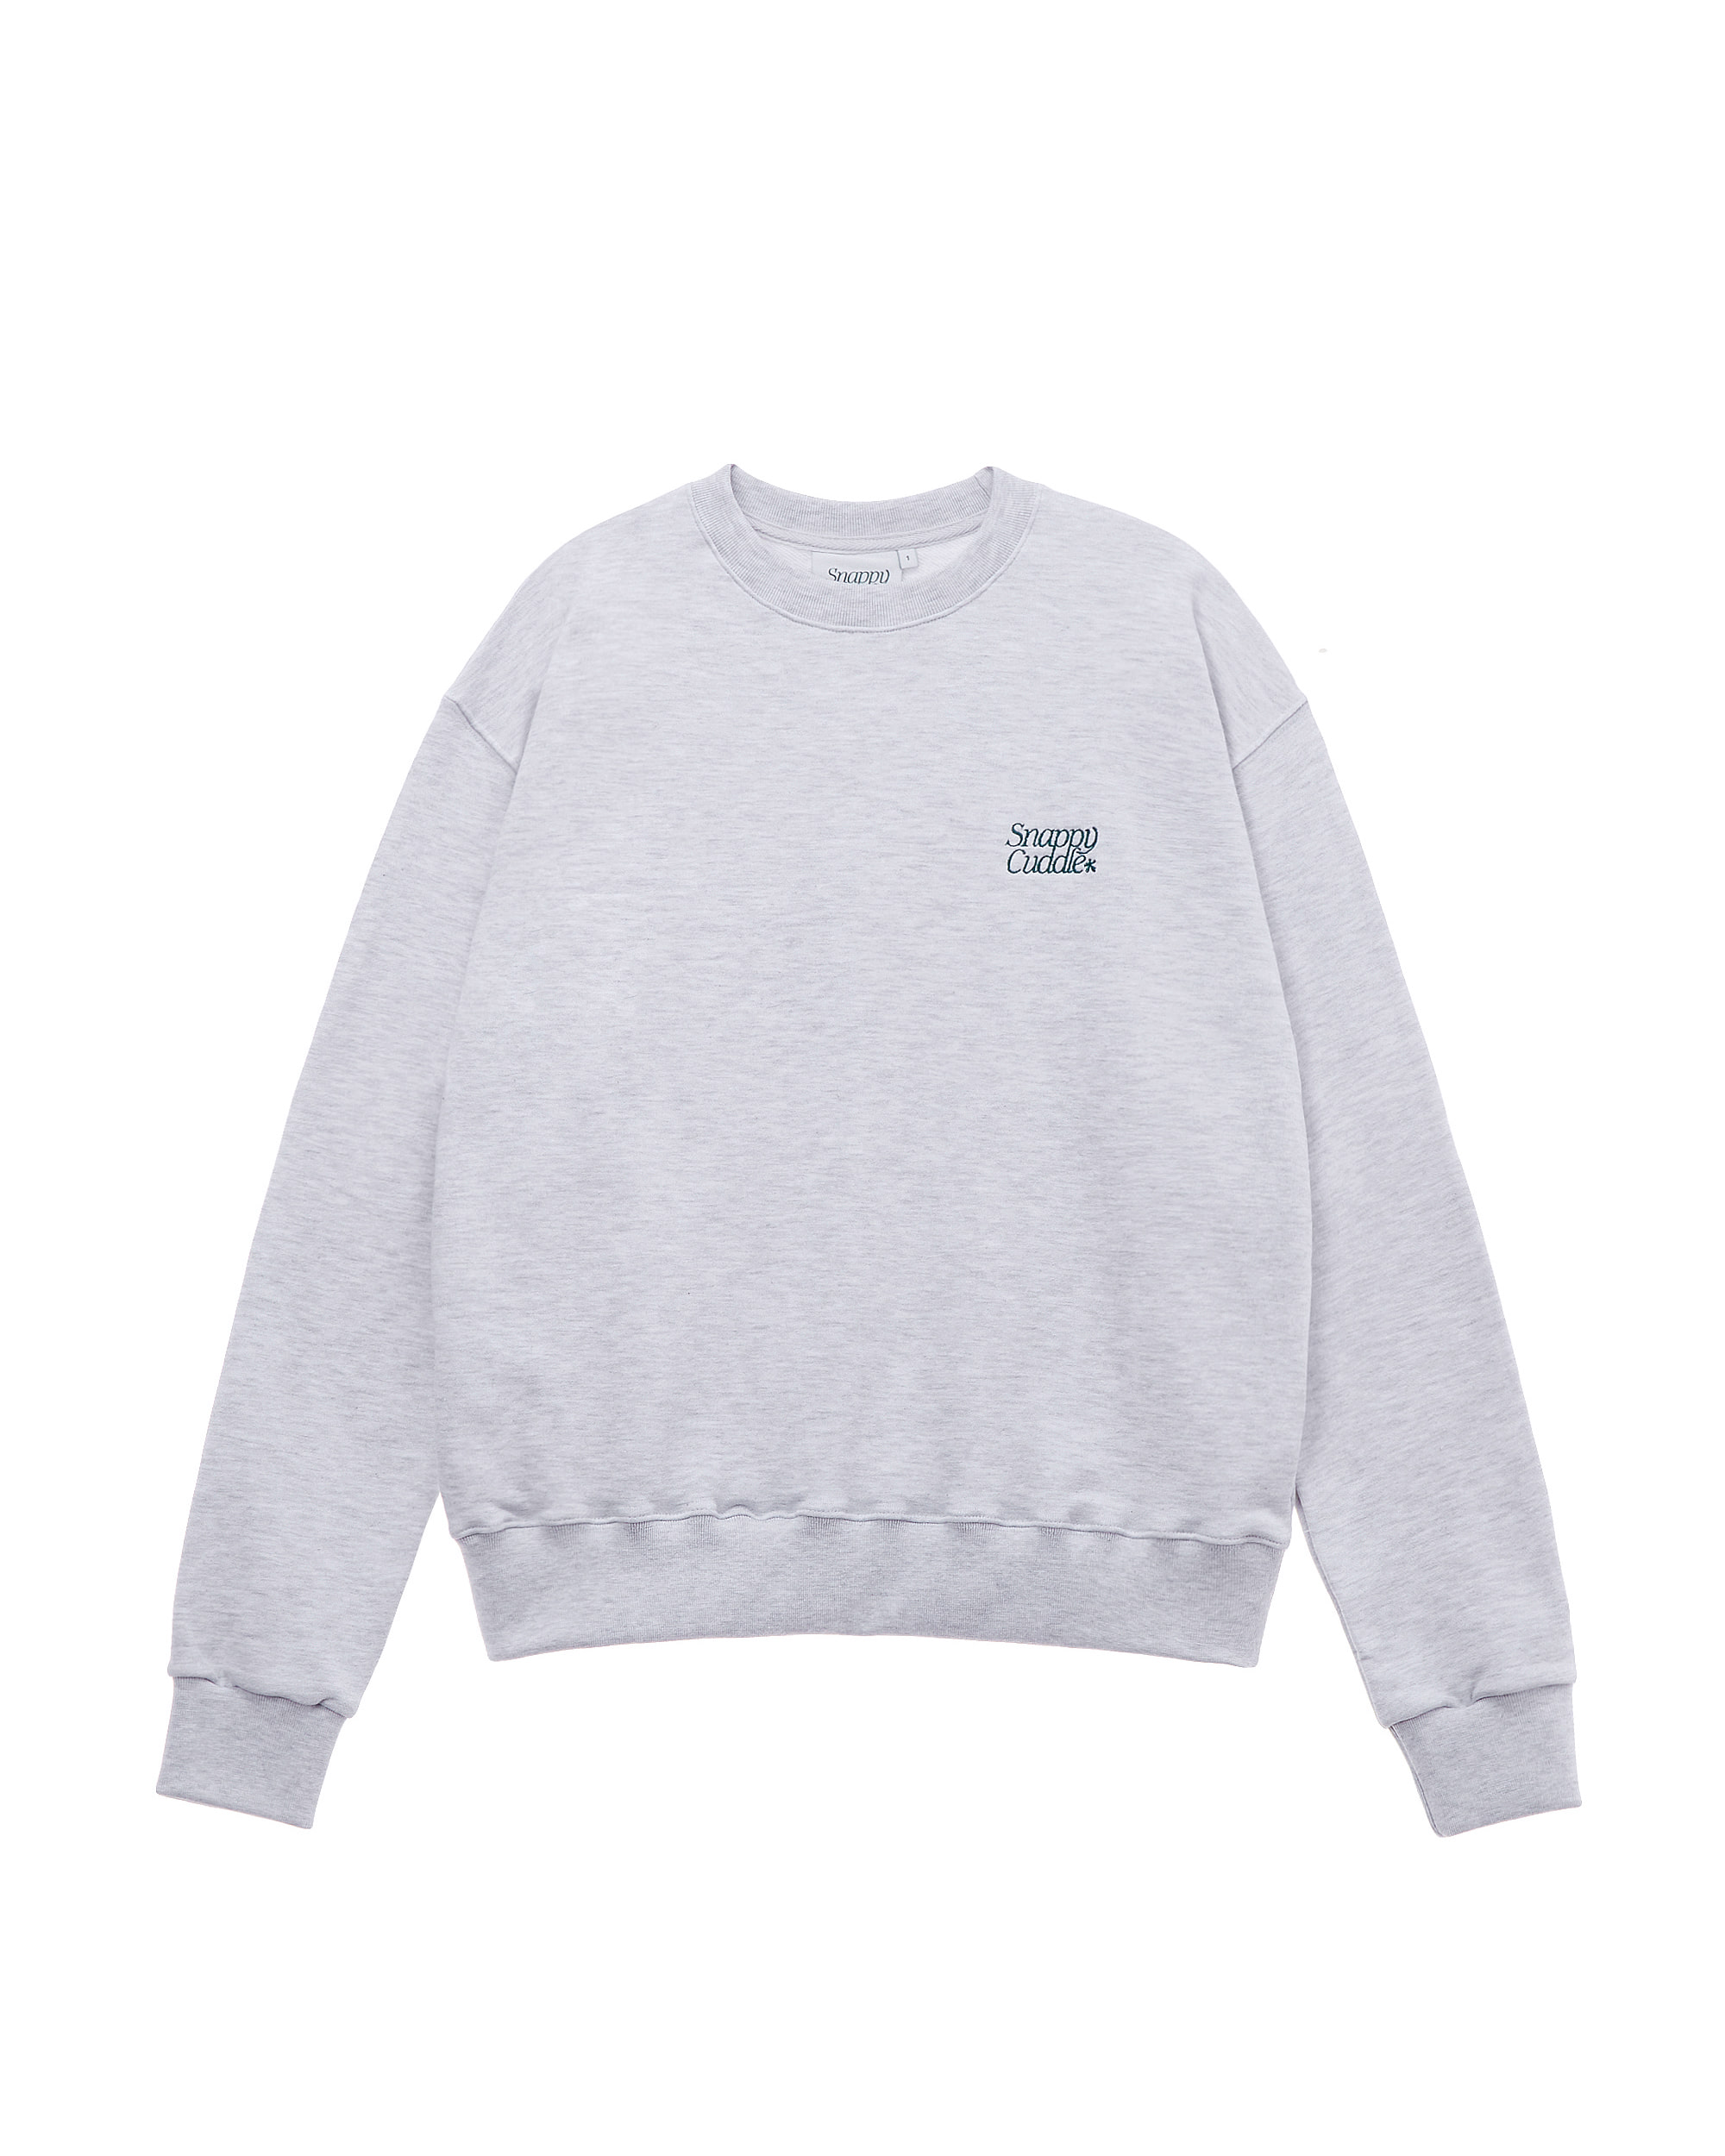 Make Your Self Sweat Shirt (Chilly Grey)